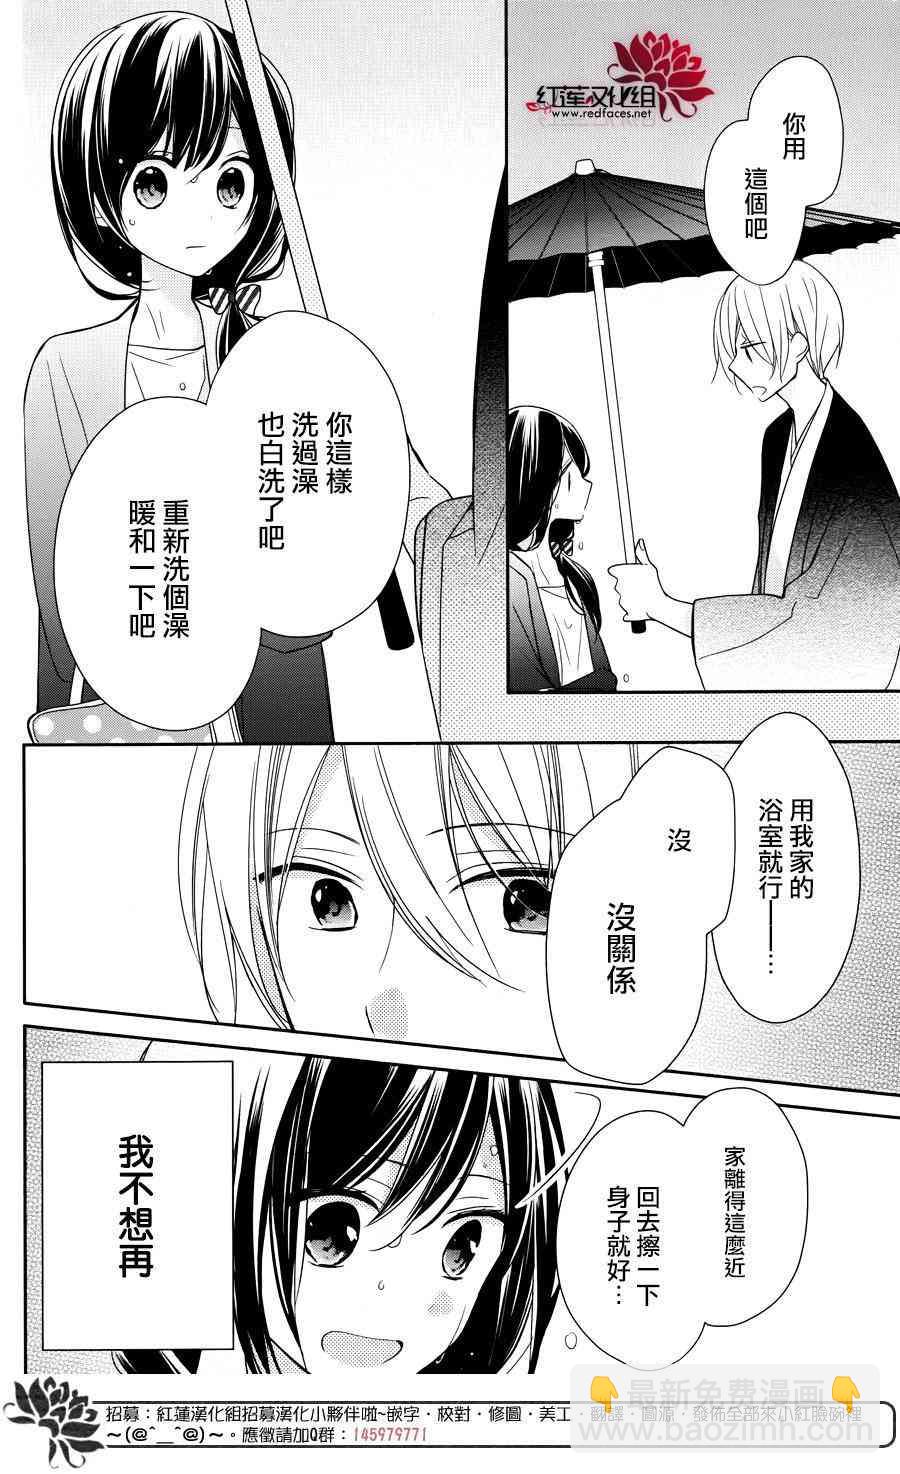 If given a second chance - 4话 - 8